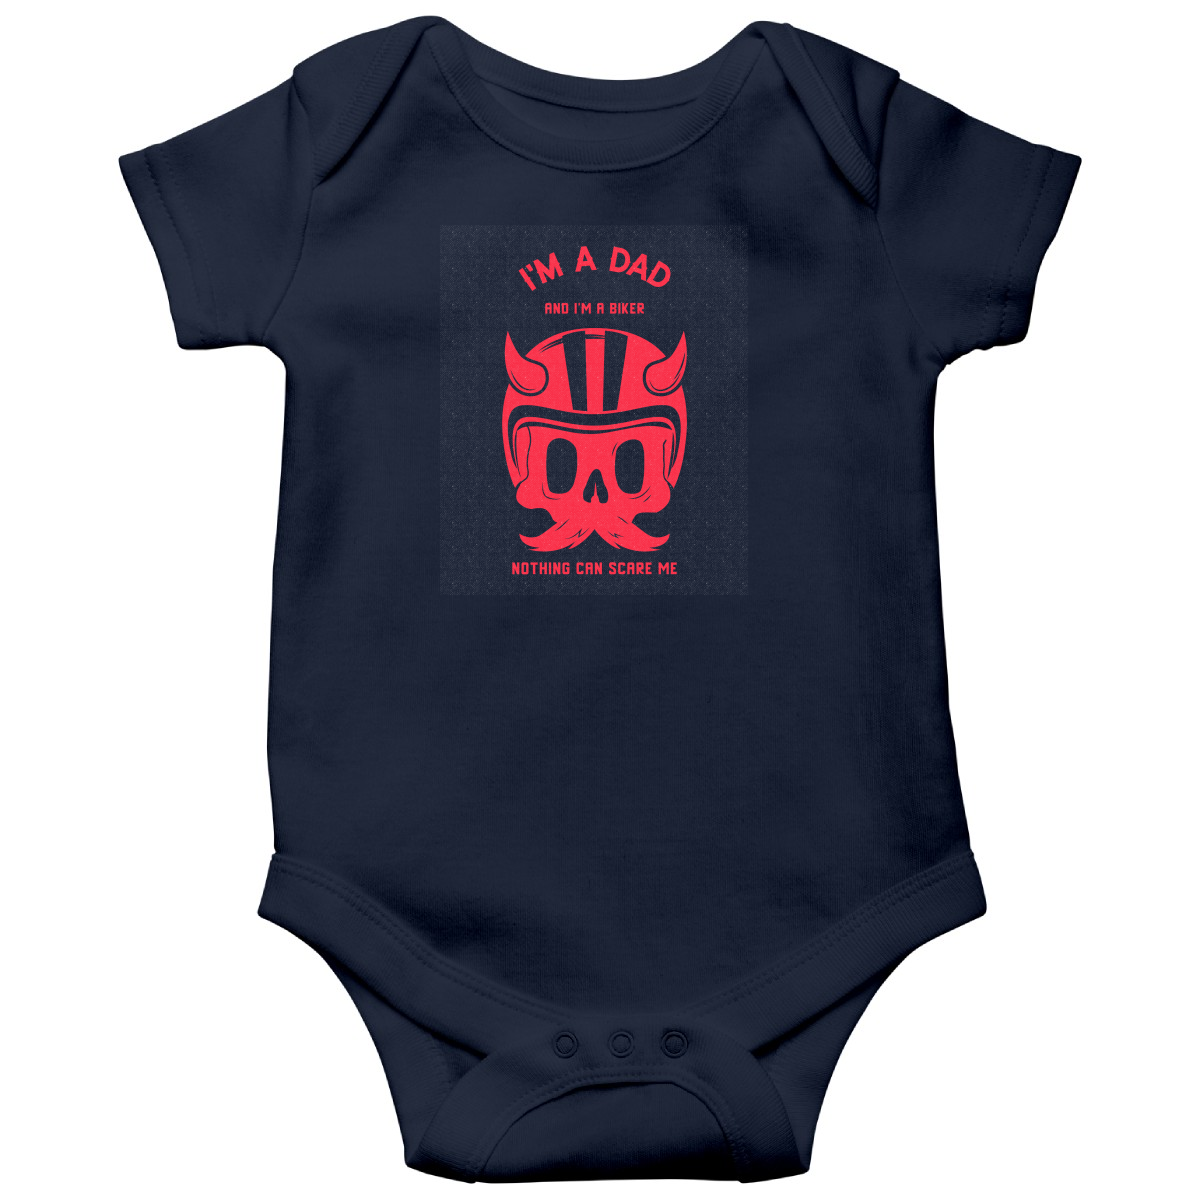 I'm a dad and a biker Baby Bodysuits | Navy